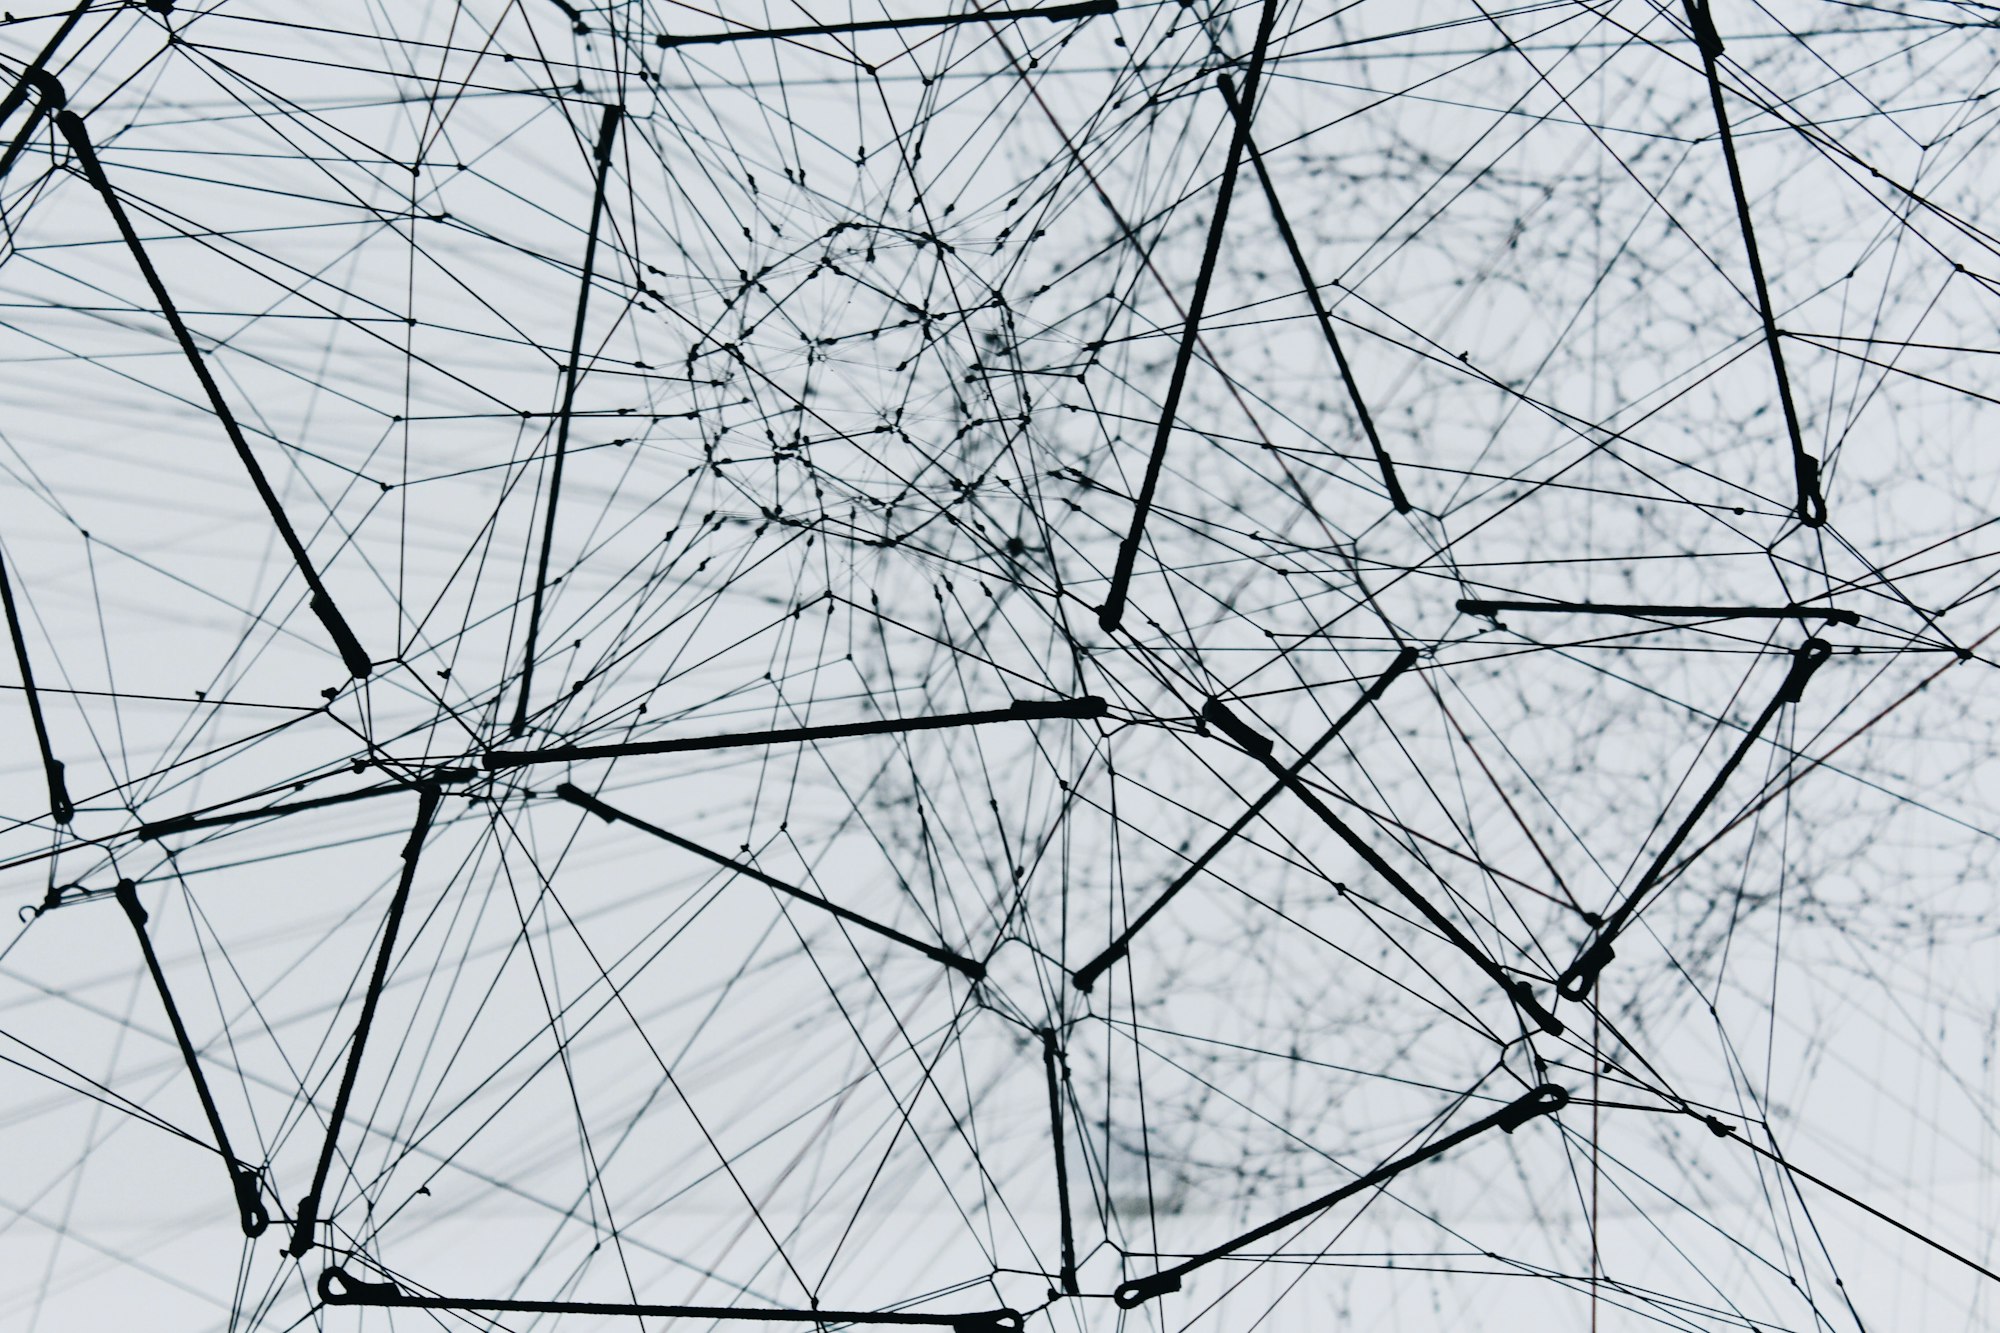 Learn how to code Neural Networks from scratch with one of the greats